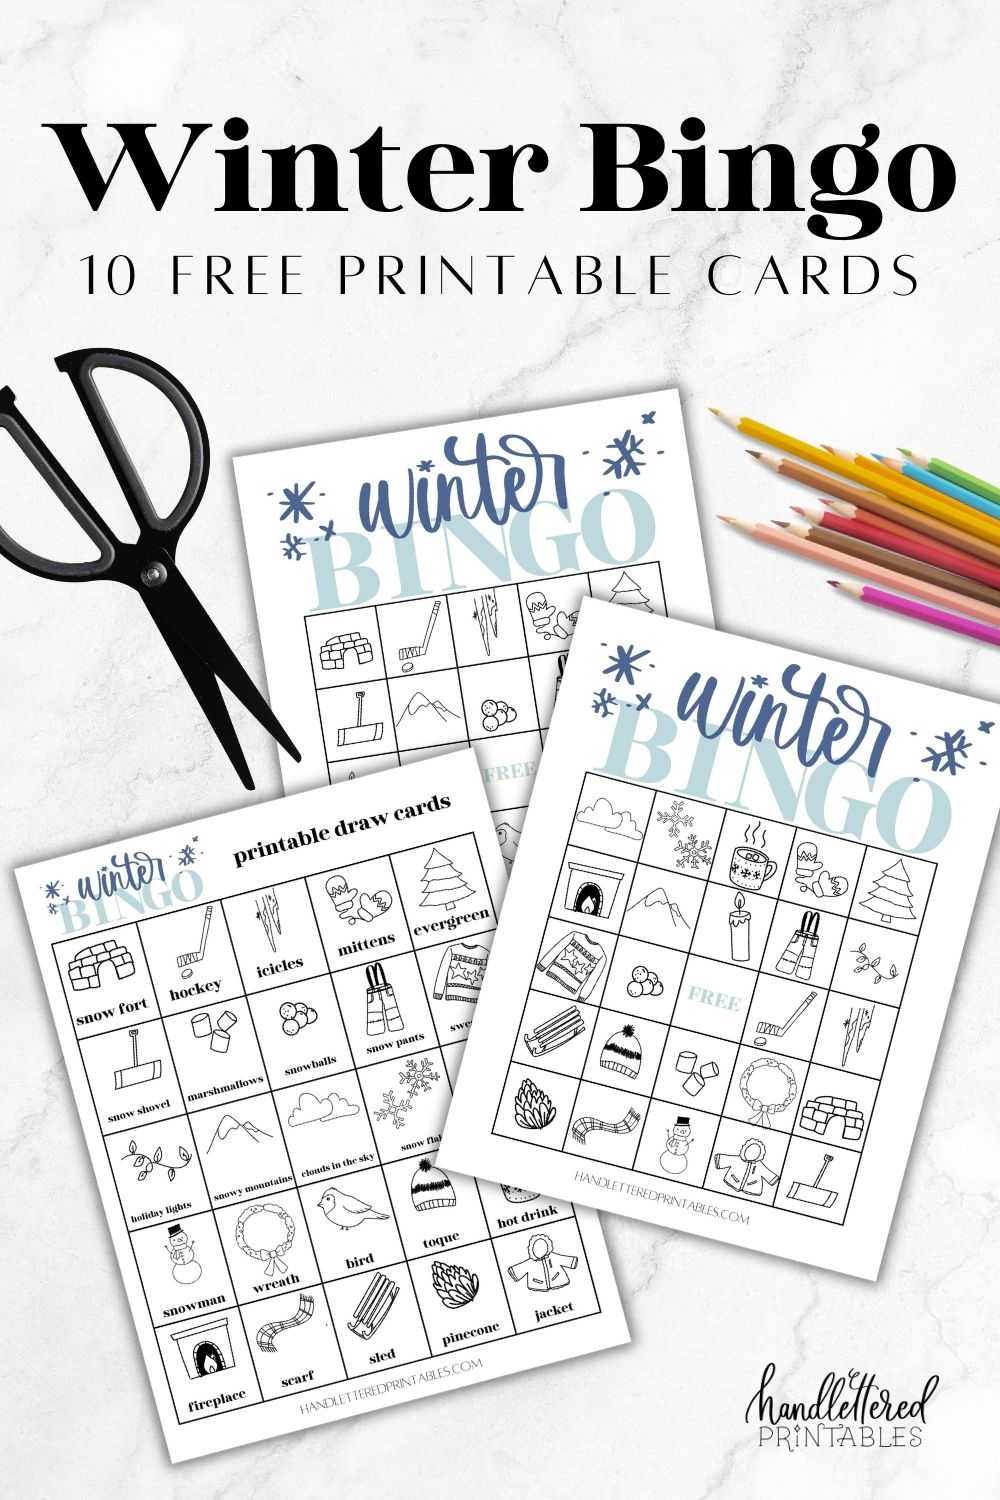 image of winter bingo cards printed on marble countertop with black scissors and pencil crayons. text over reads winter bingo 10 free printable cards